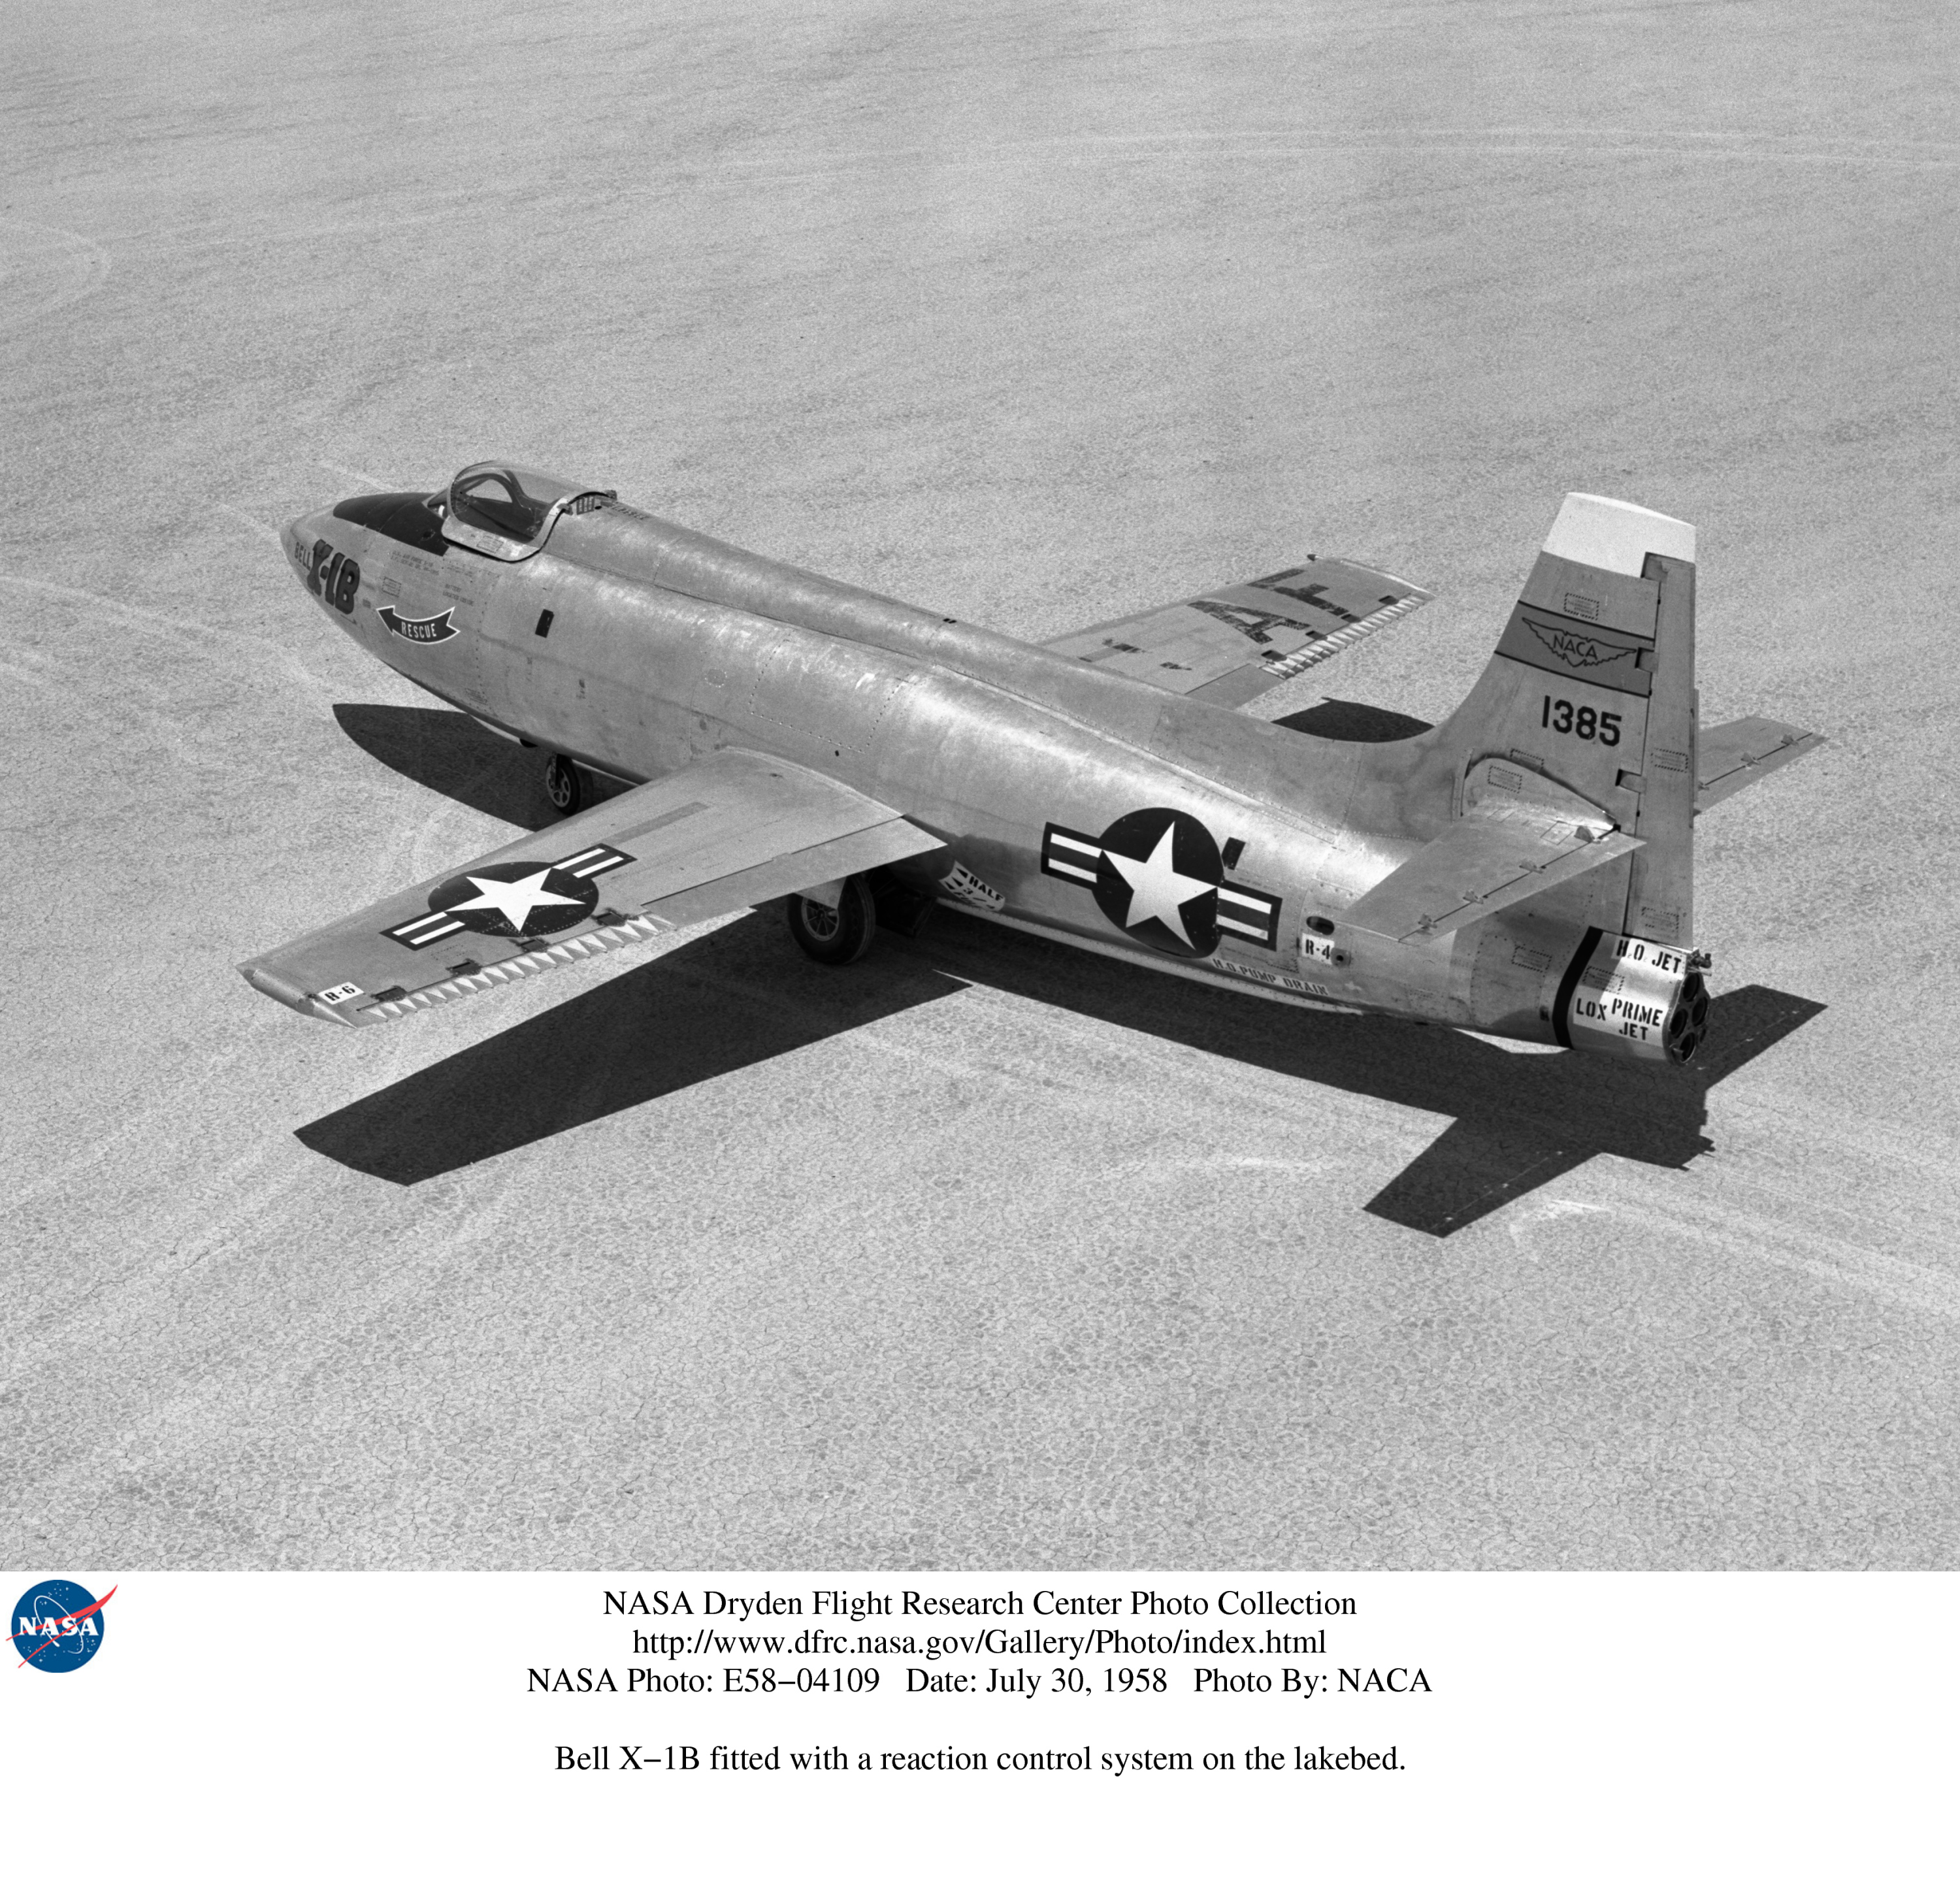 Bell aircraft corporation x-1b (sn 48-1385) fitted with a reaction control system on the lakebed. photo